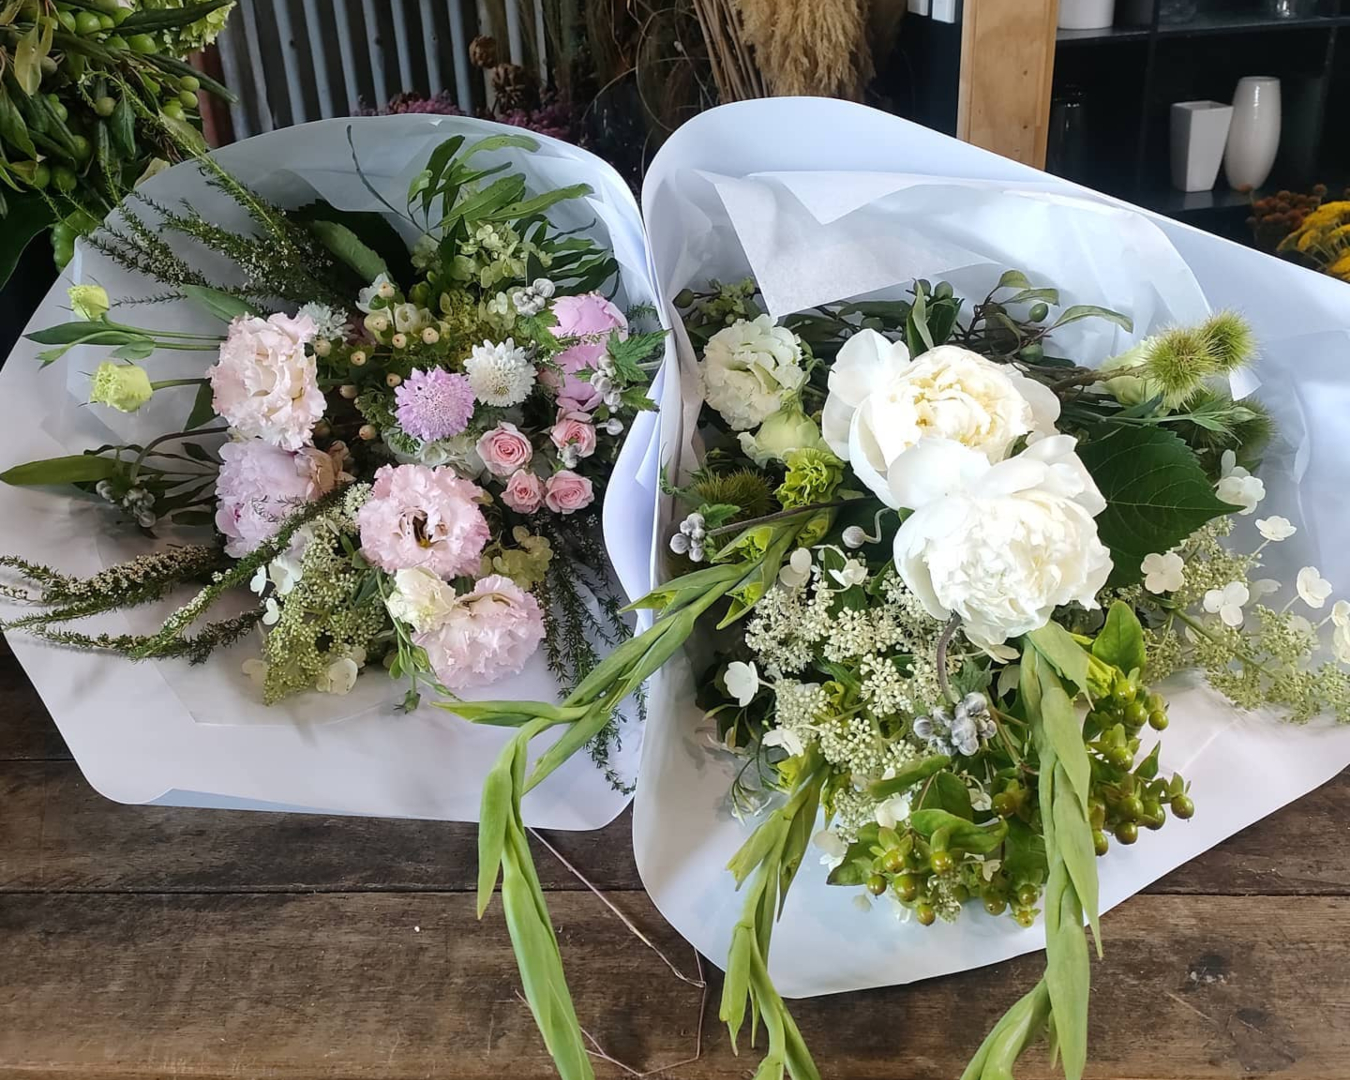 Two beautiful, pastel bouquets from Flowers Manuela sit side-by-side